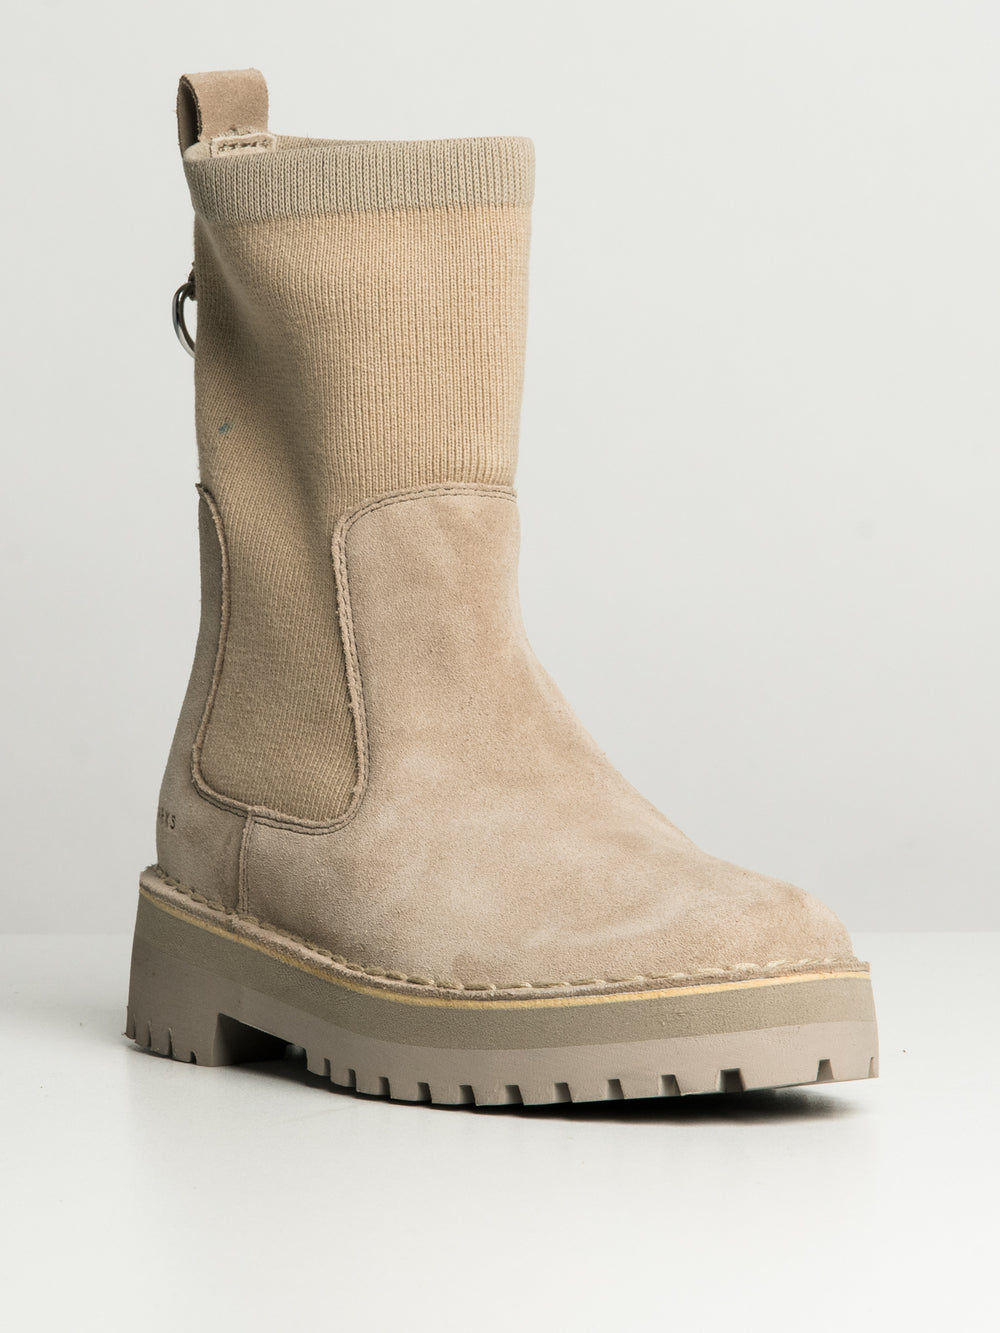 WOMENS CLARKS ROCK KNIT BOOT - CLEARANCE